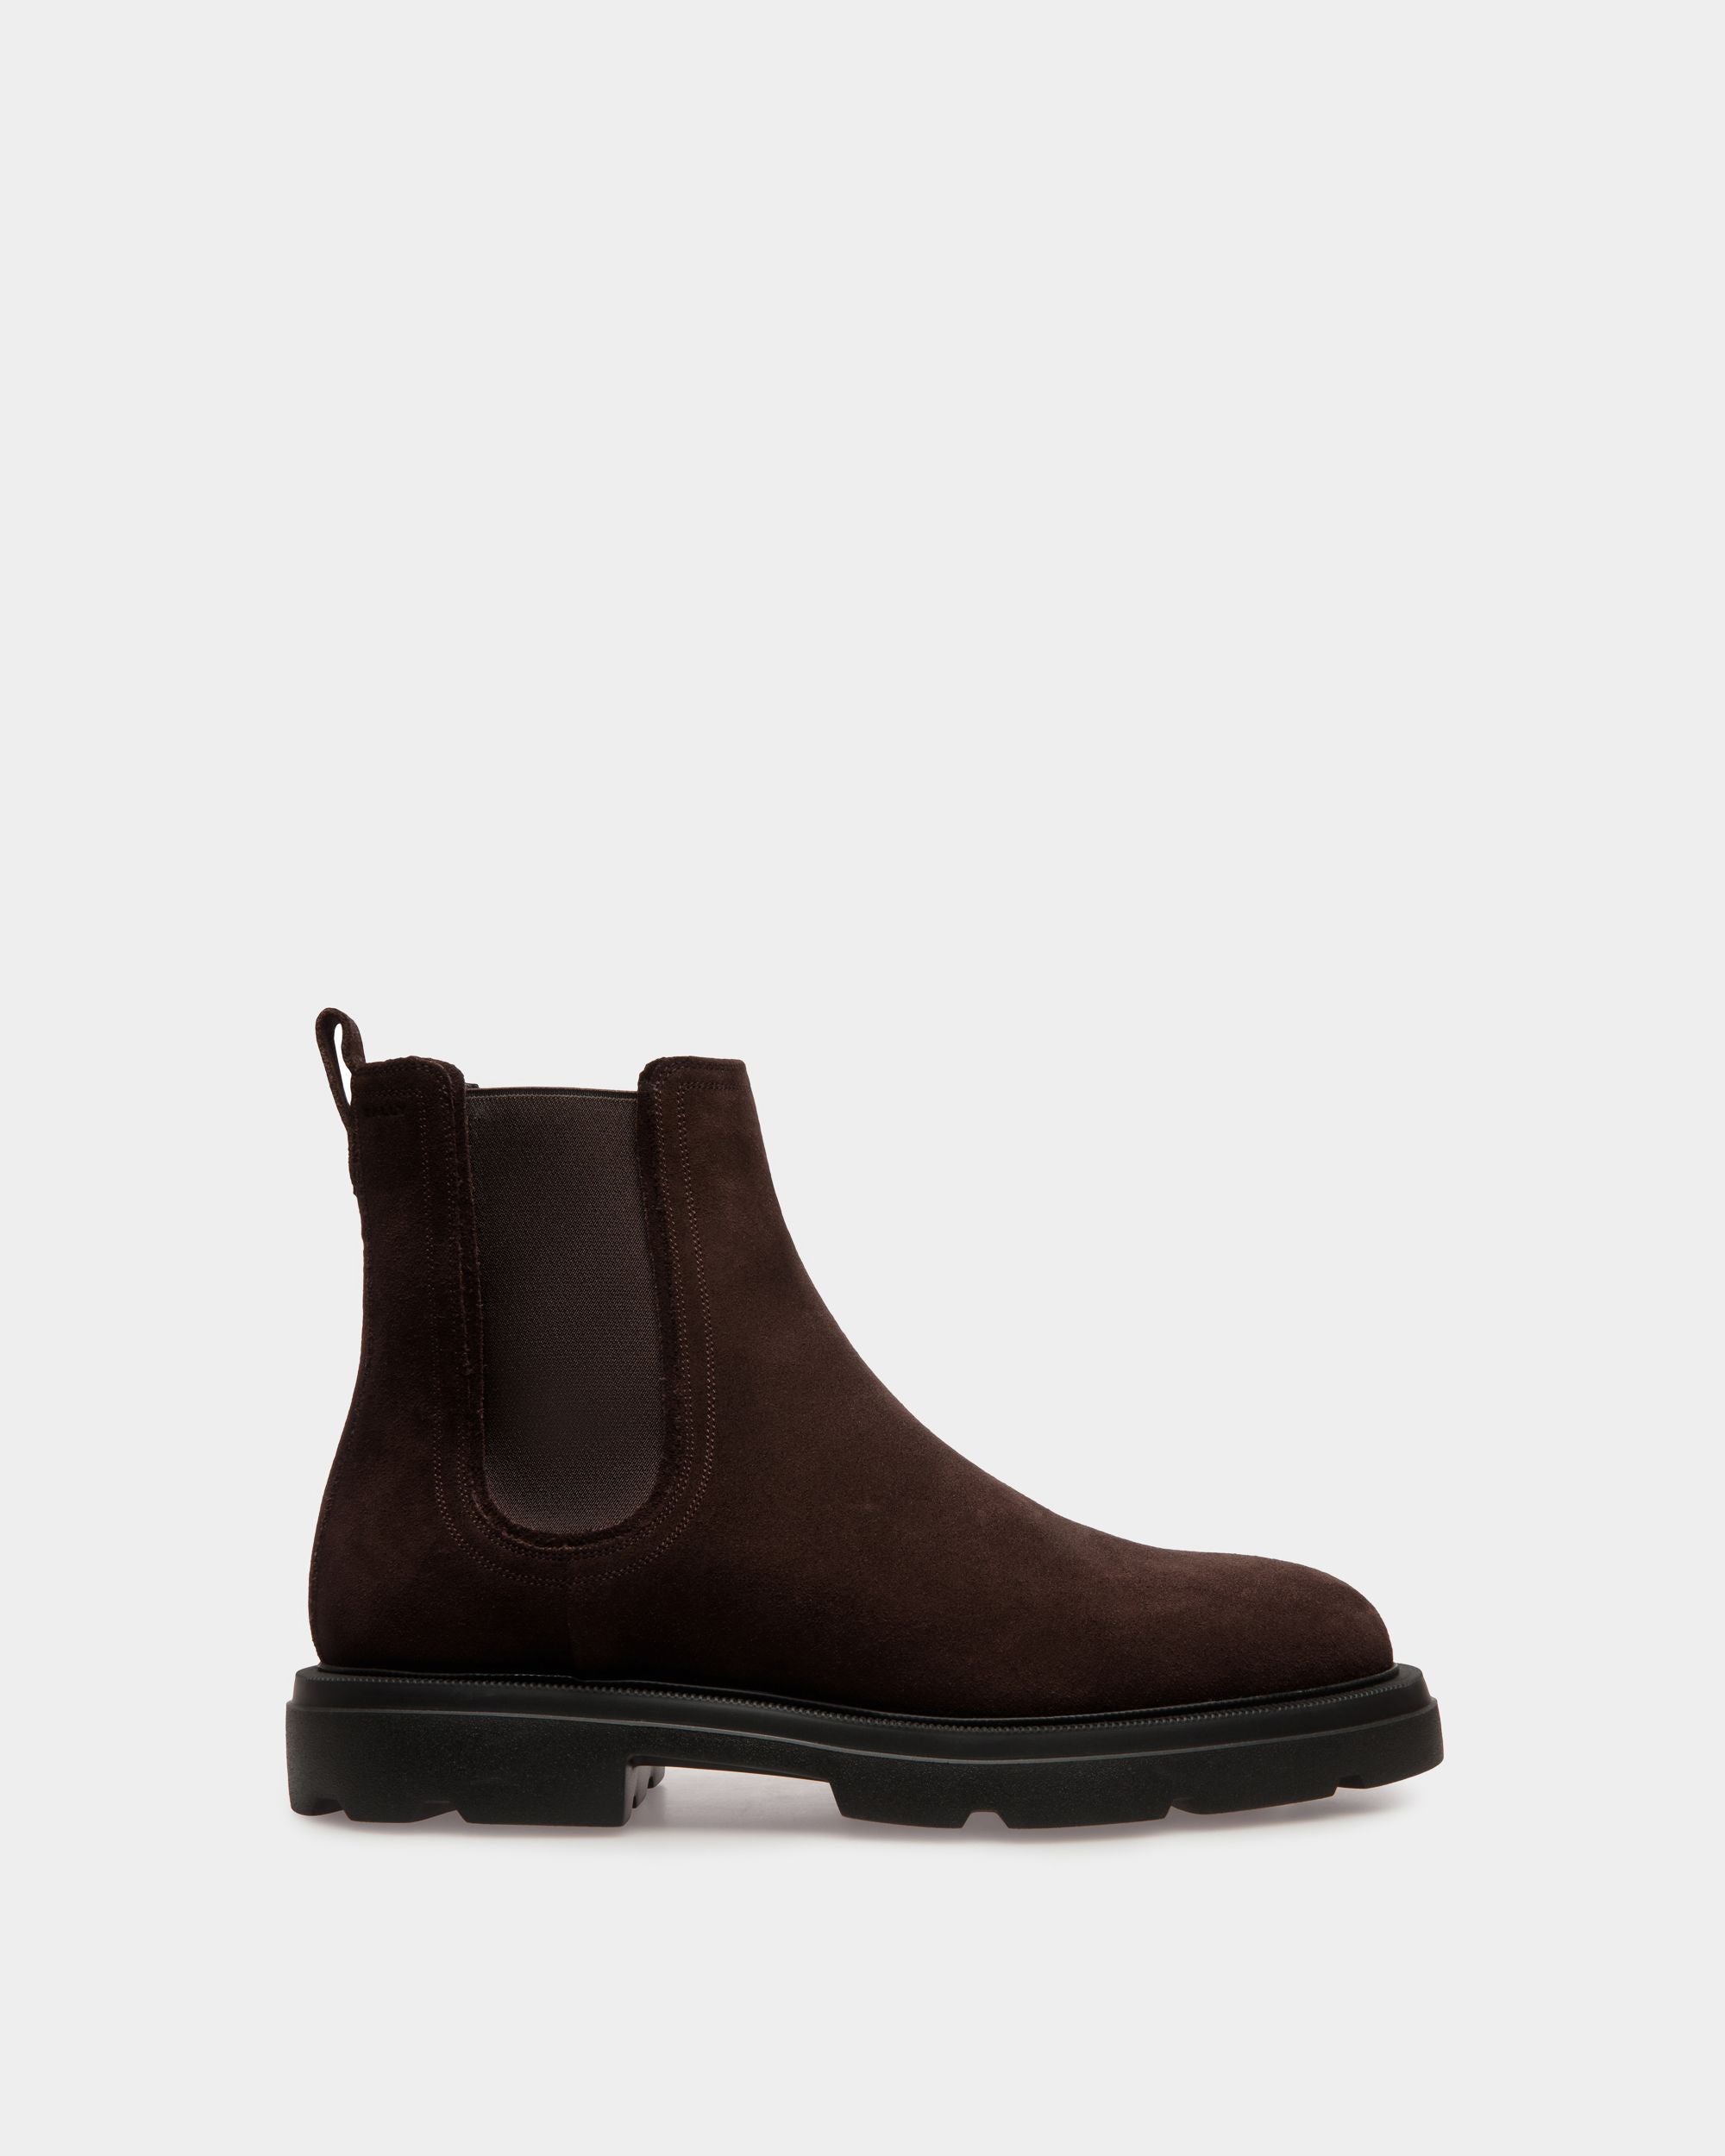 Zurich Booties | Men's Shoes | Brown Suede | Bally | Still Life Side